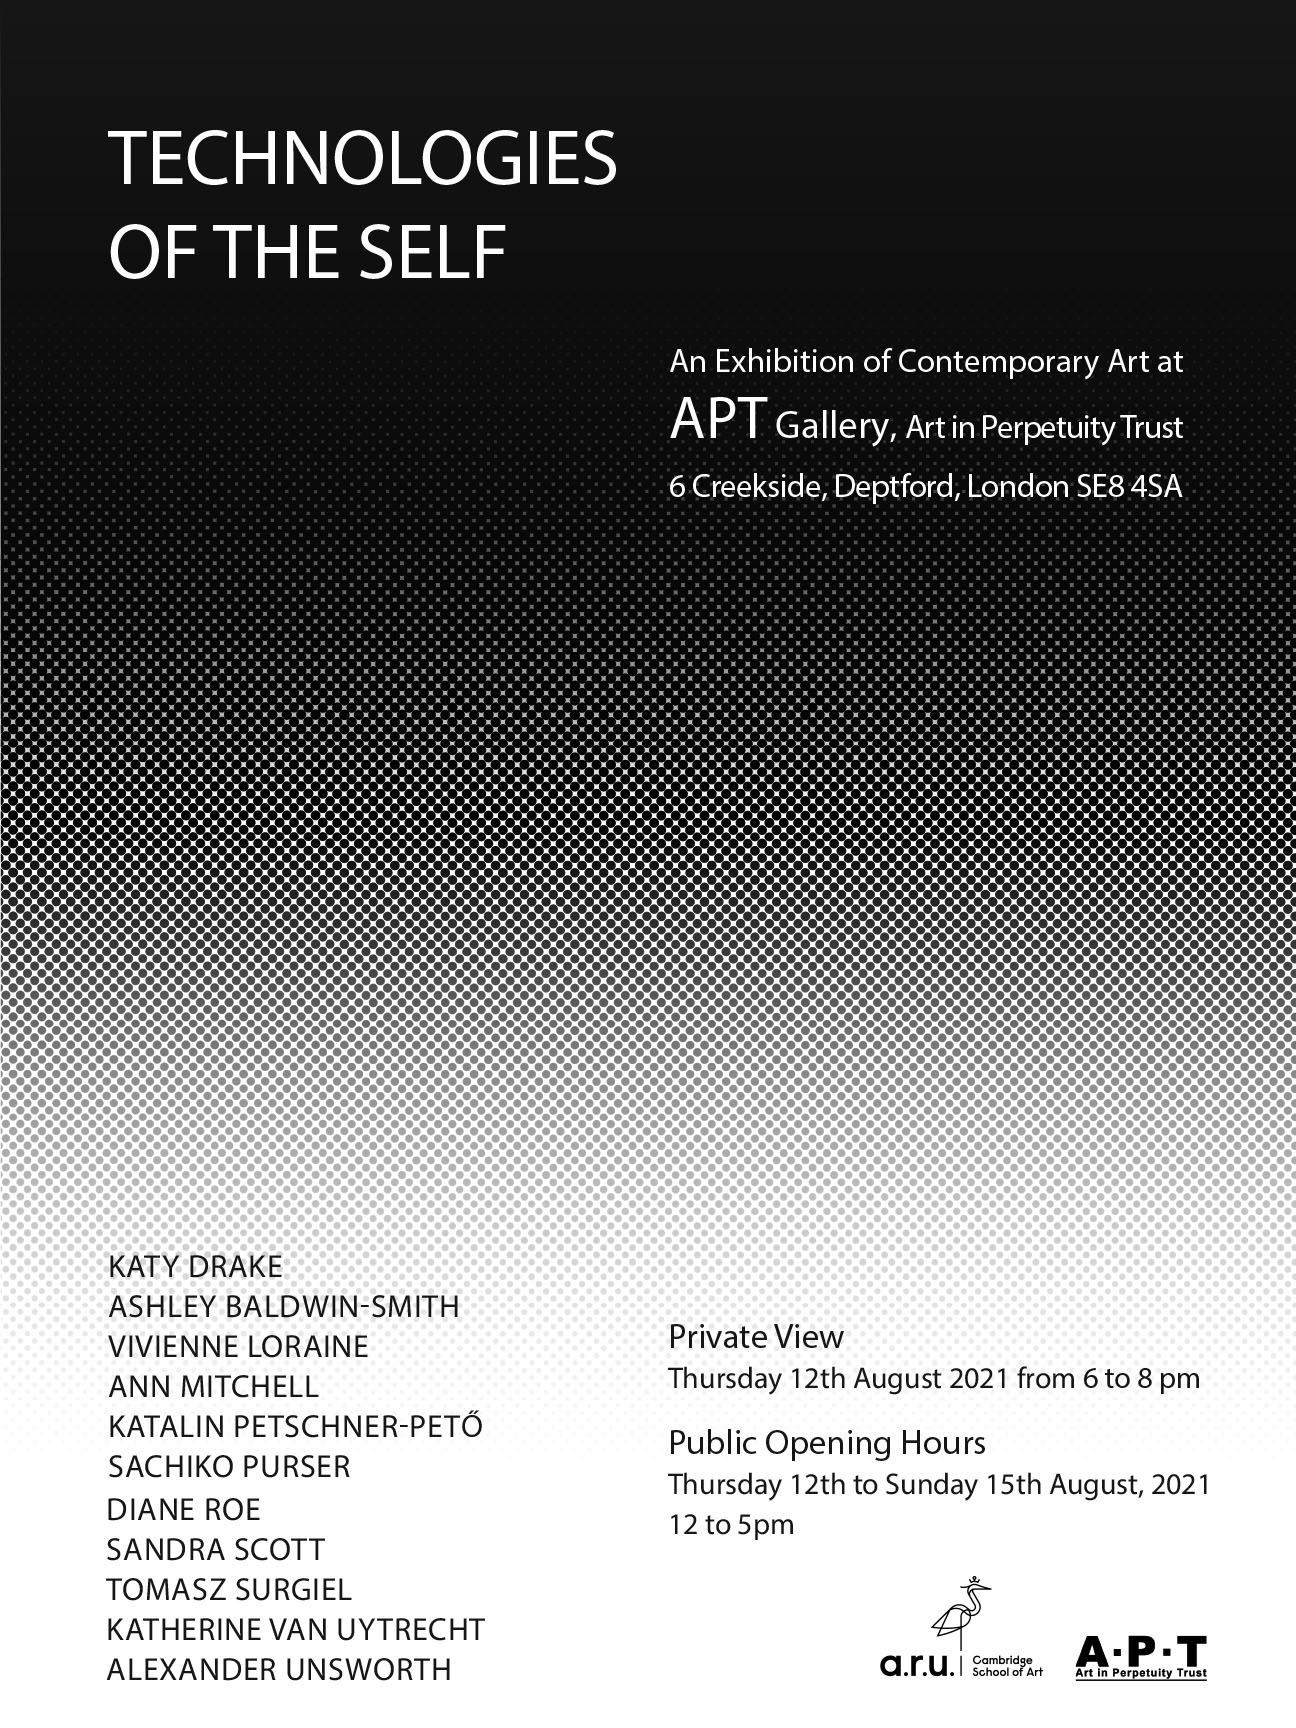 Technologies of the Self exhibition poster.